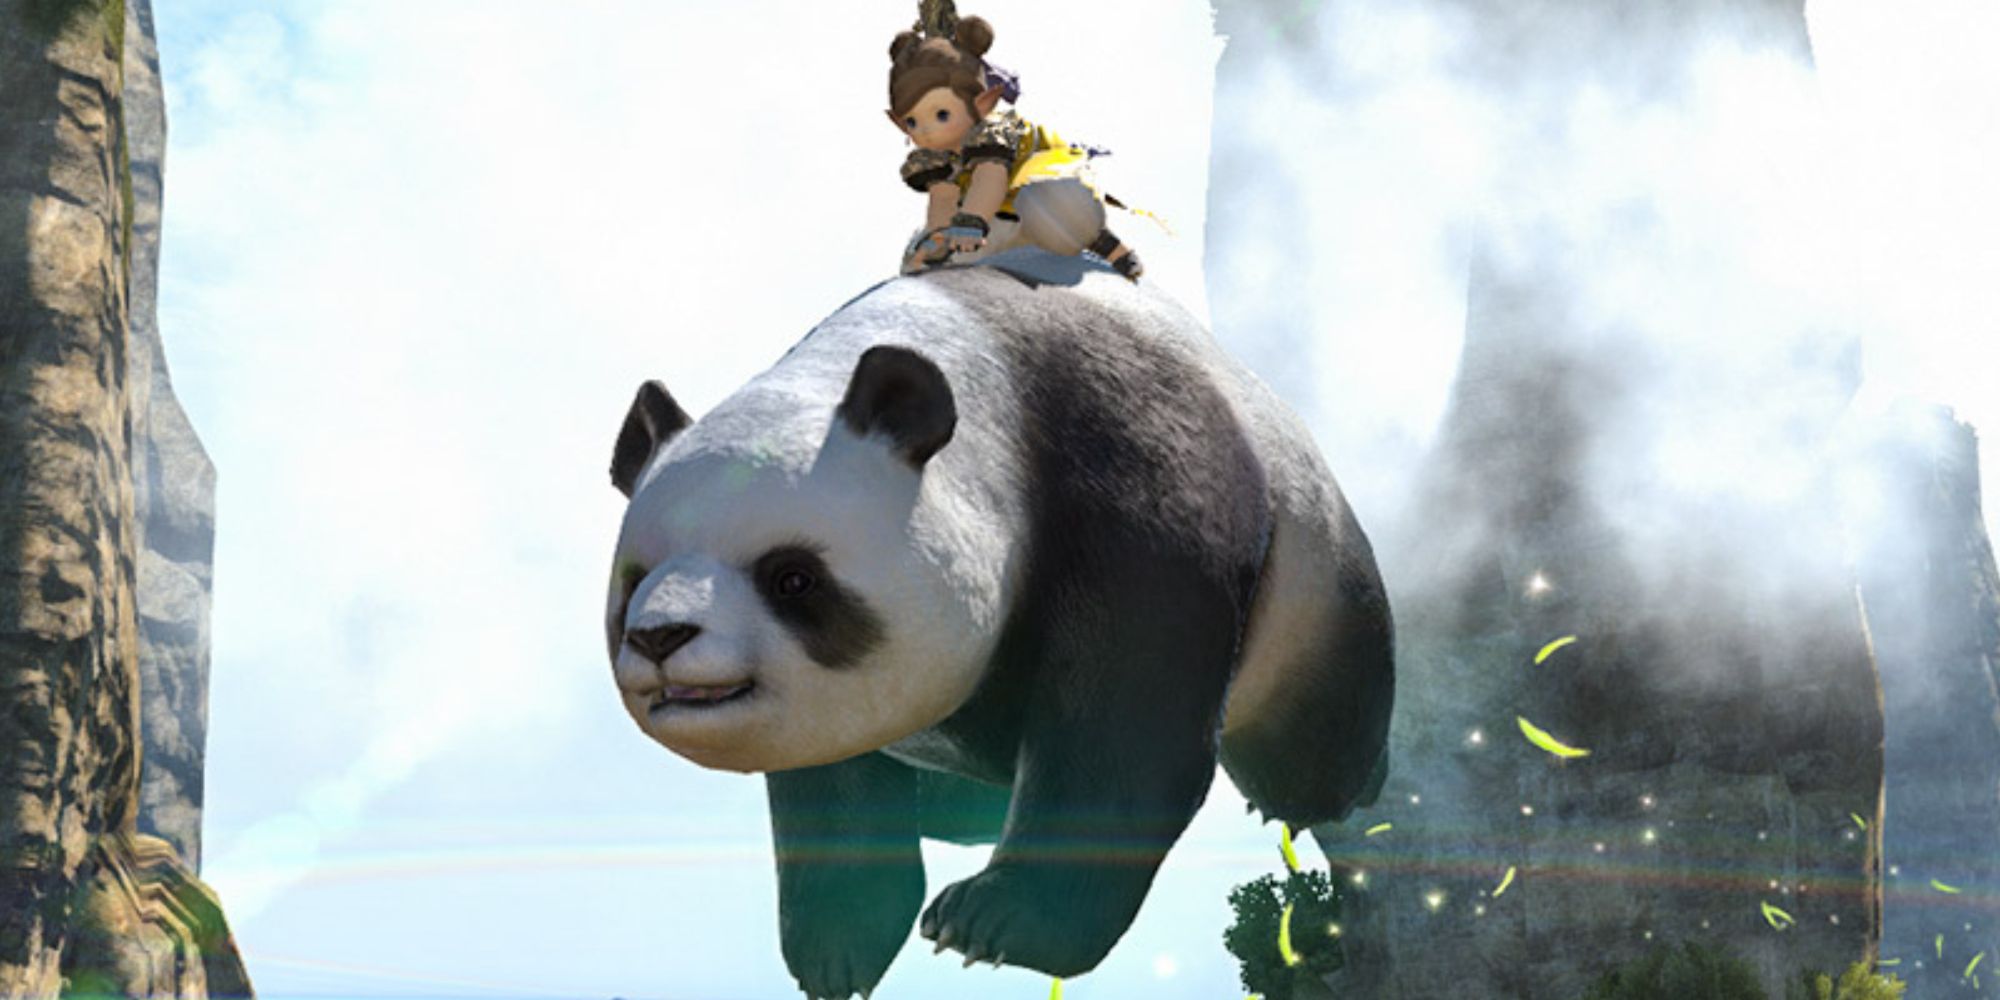 A Lalafell riding on the back of a Panda in front of a waterfall via the Mystic Panda Mount in Final Fantasy 14